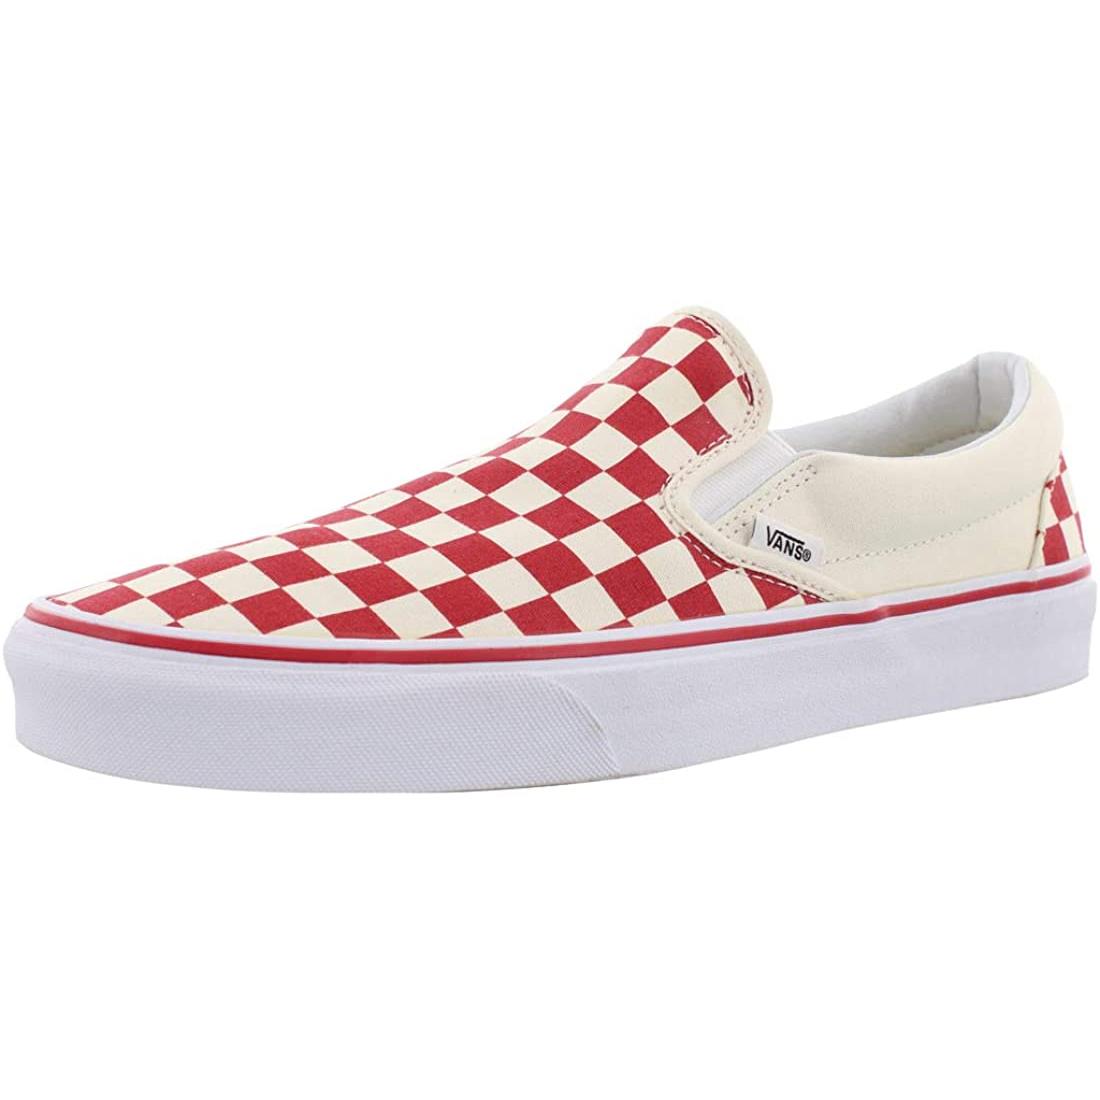 Vans shoes  - Black/Off White/Checkerboard 22